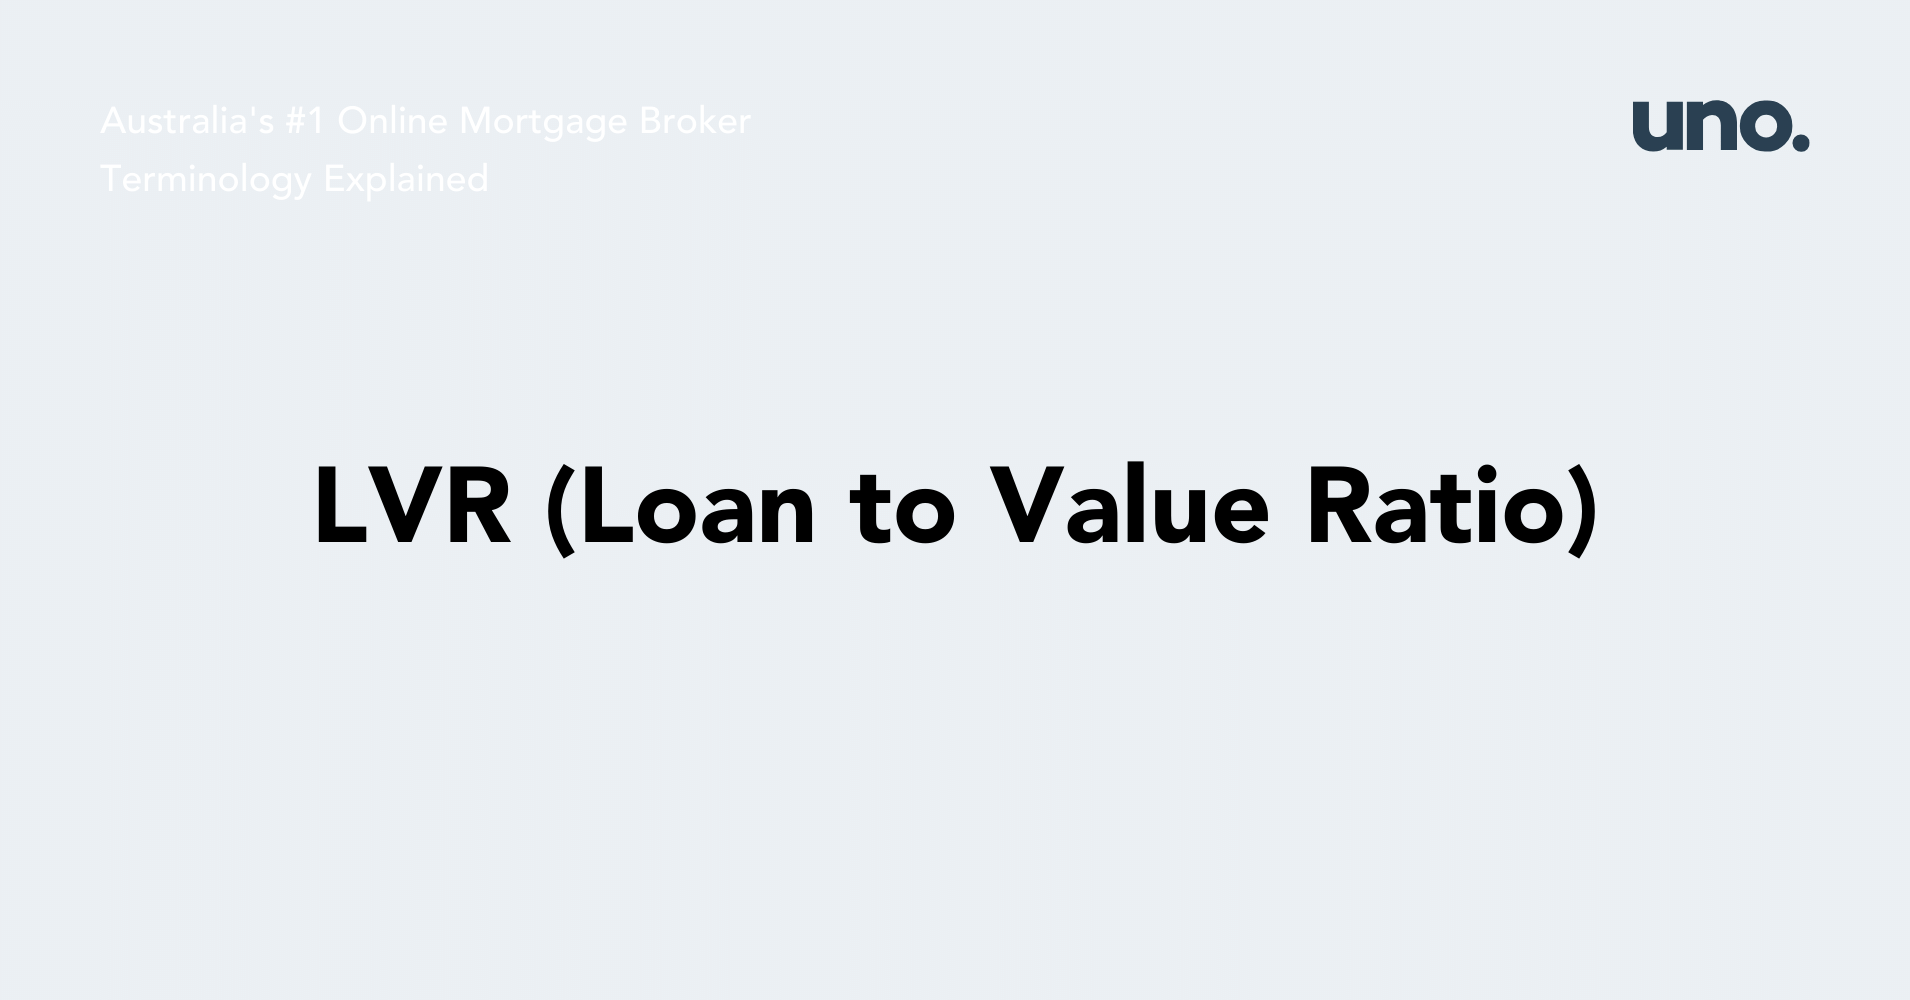 LVR (Loan to Value Ratio)